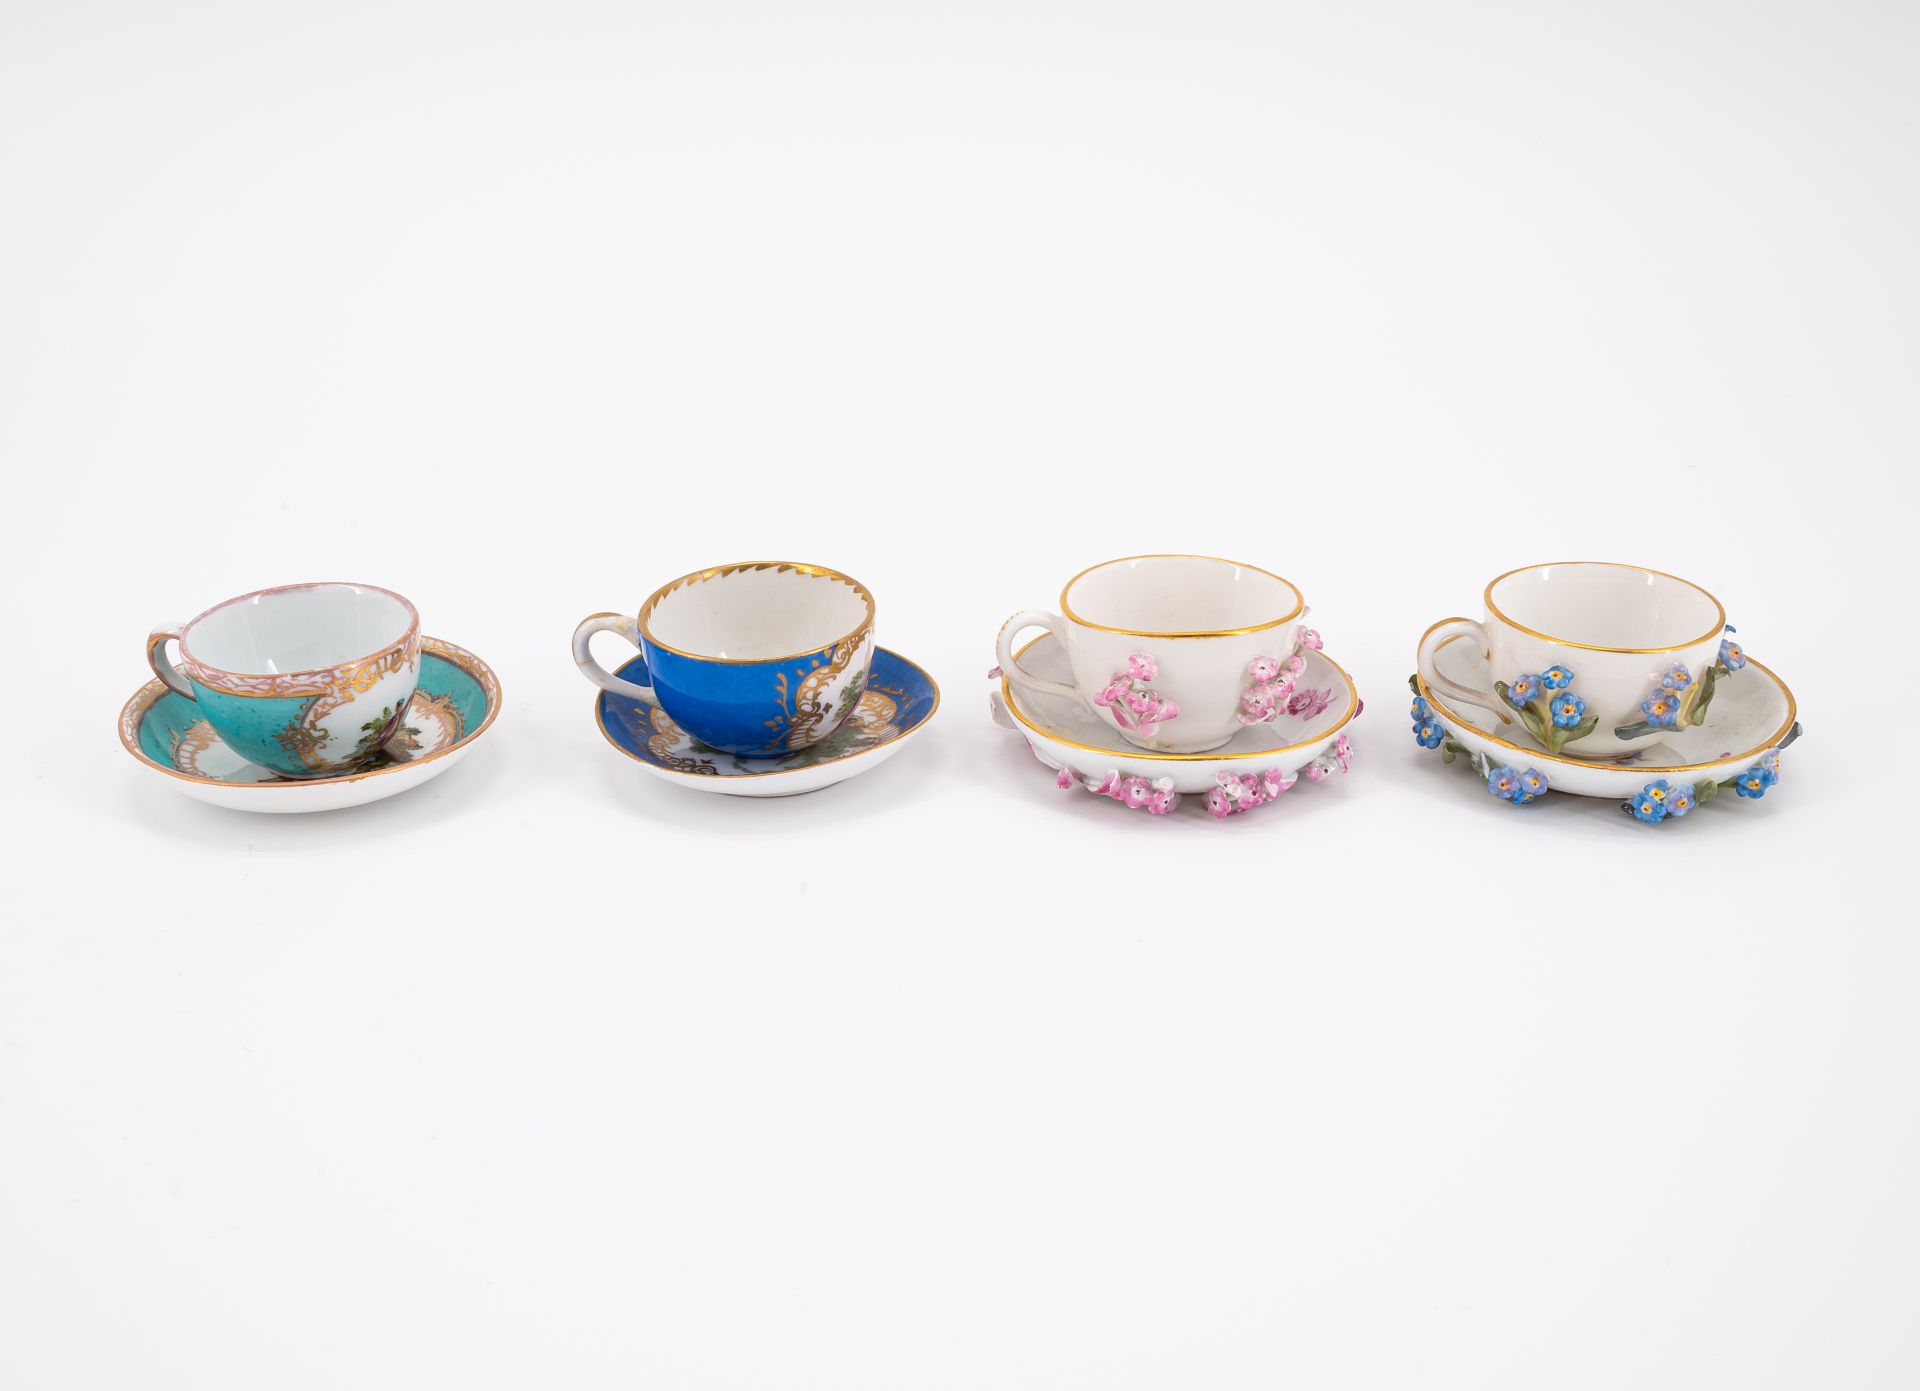 ENSEMBLE OF FIVE PORCELAIN MINIATURE CUPS AND SAUCERS WITH APPLIED FLOWERS - Image 2 of 6